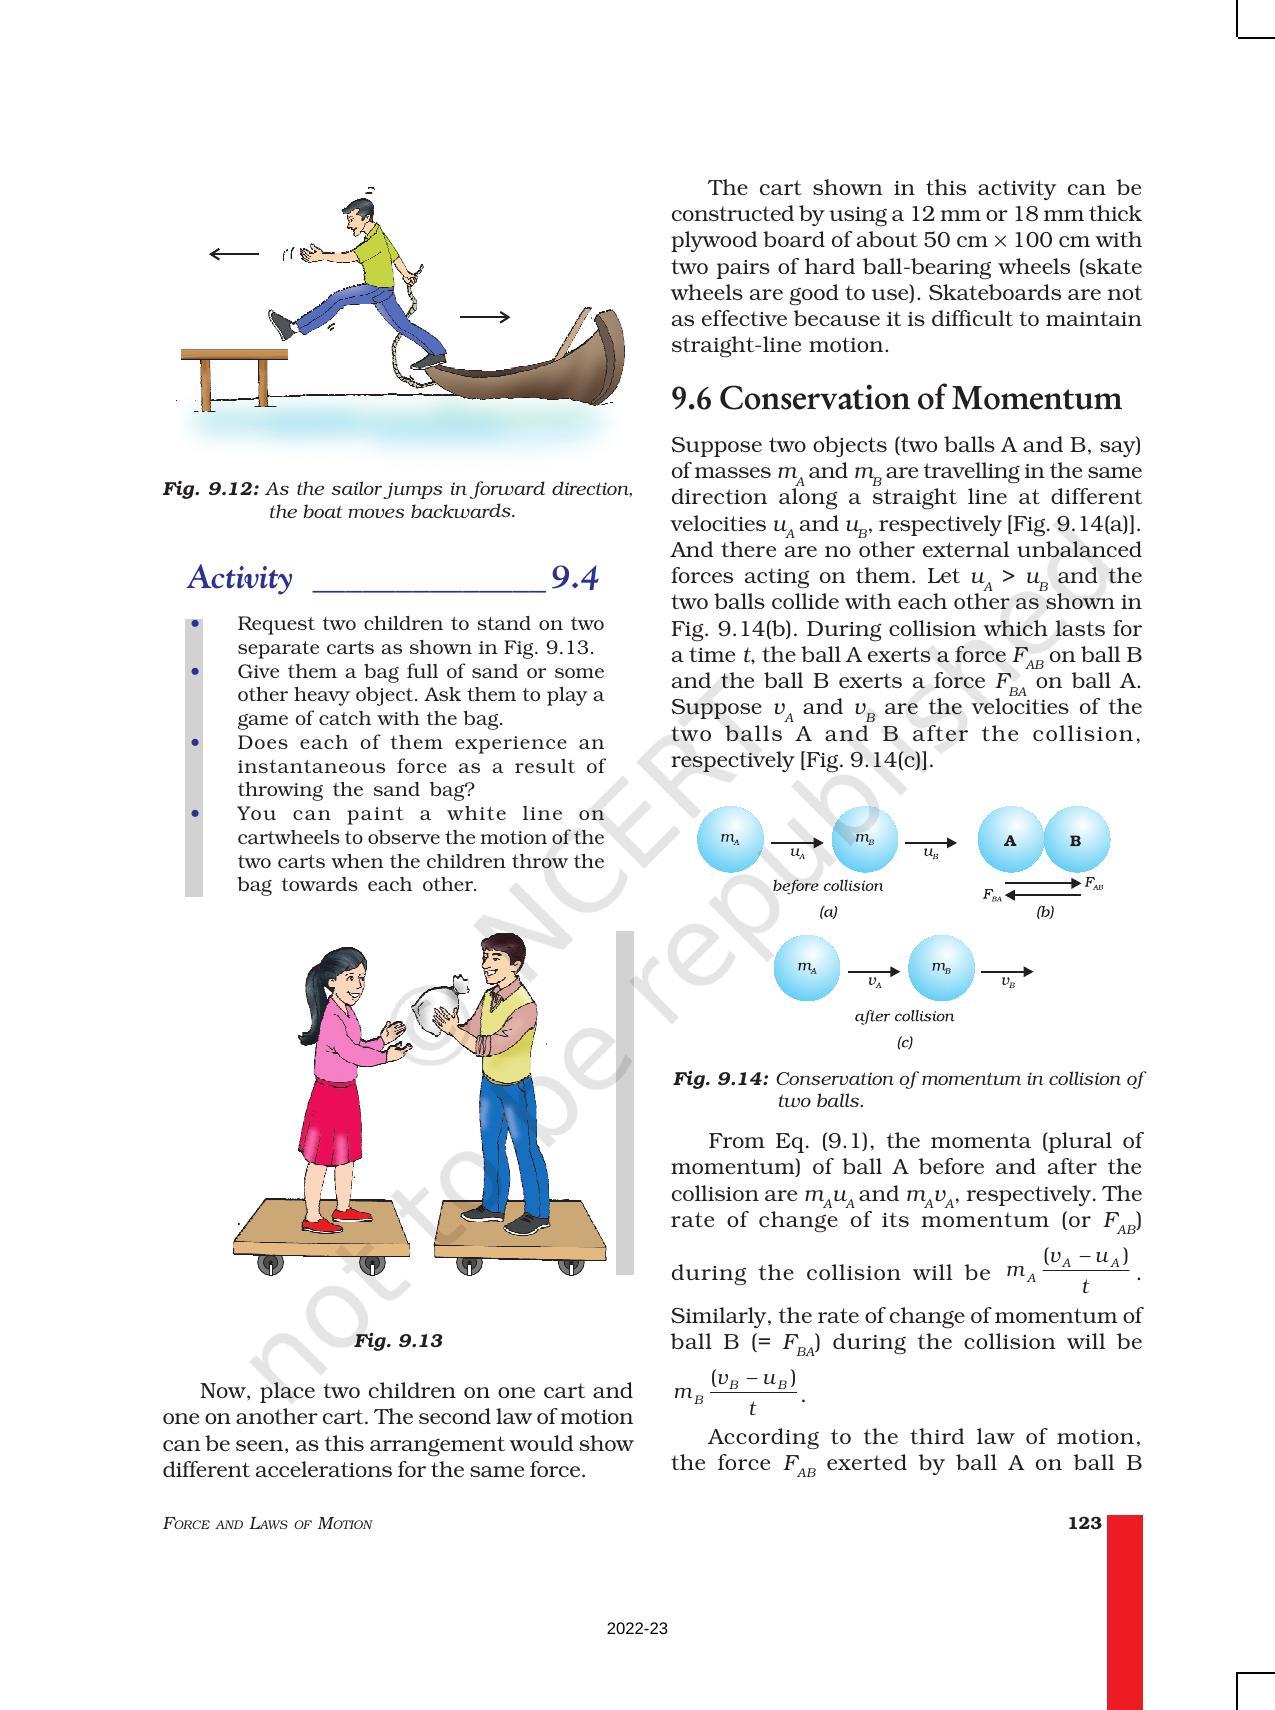 NCERT Book for Class 9 Science Chapter 9 Force And Laws Of Motion - Page 10